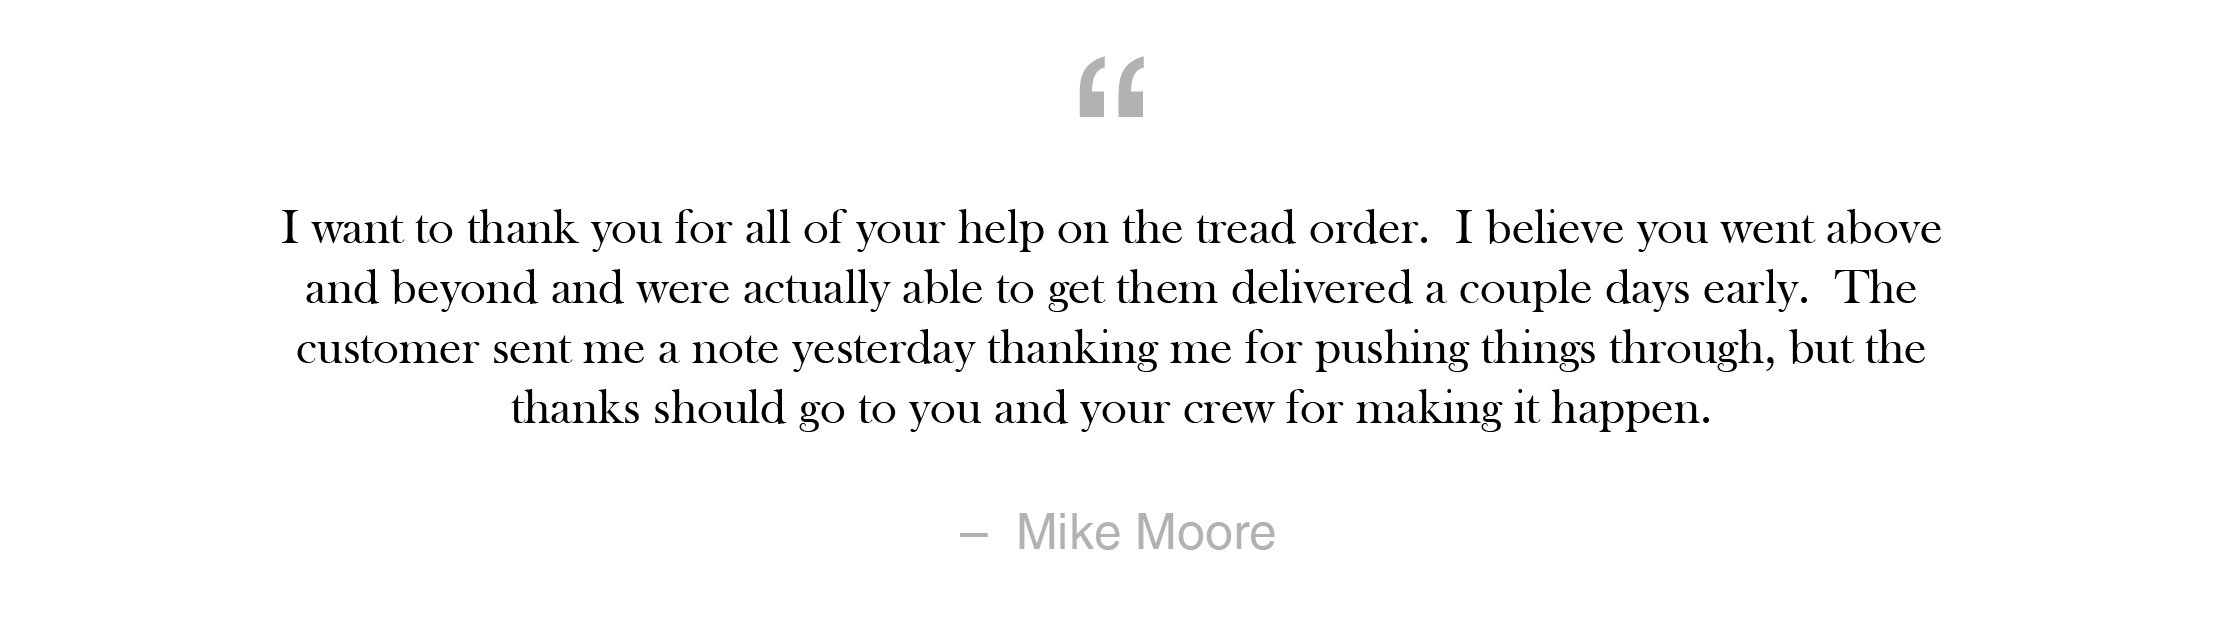 Quote#9_MikeMoore-01.png